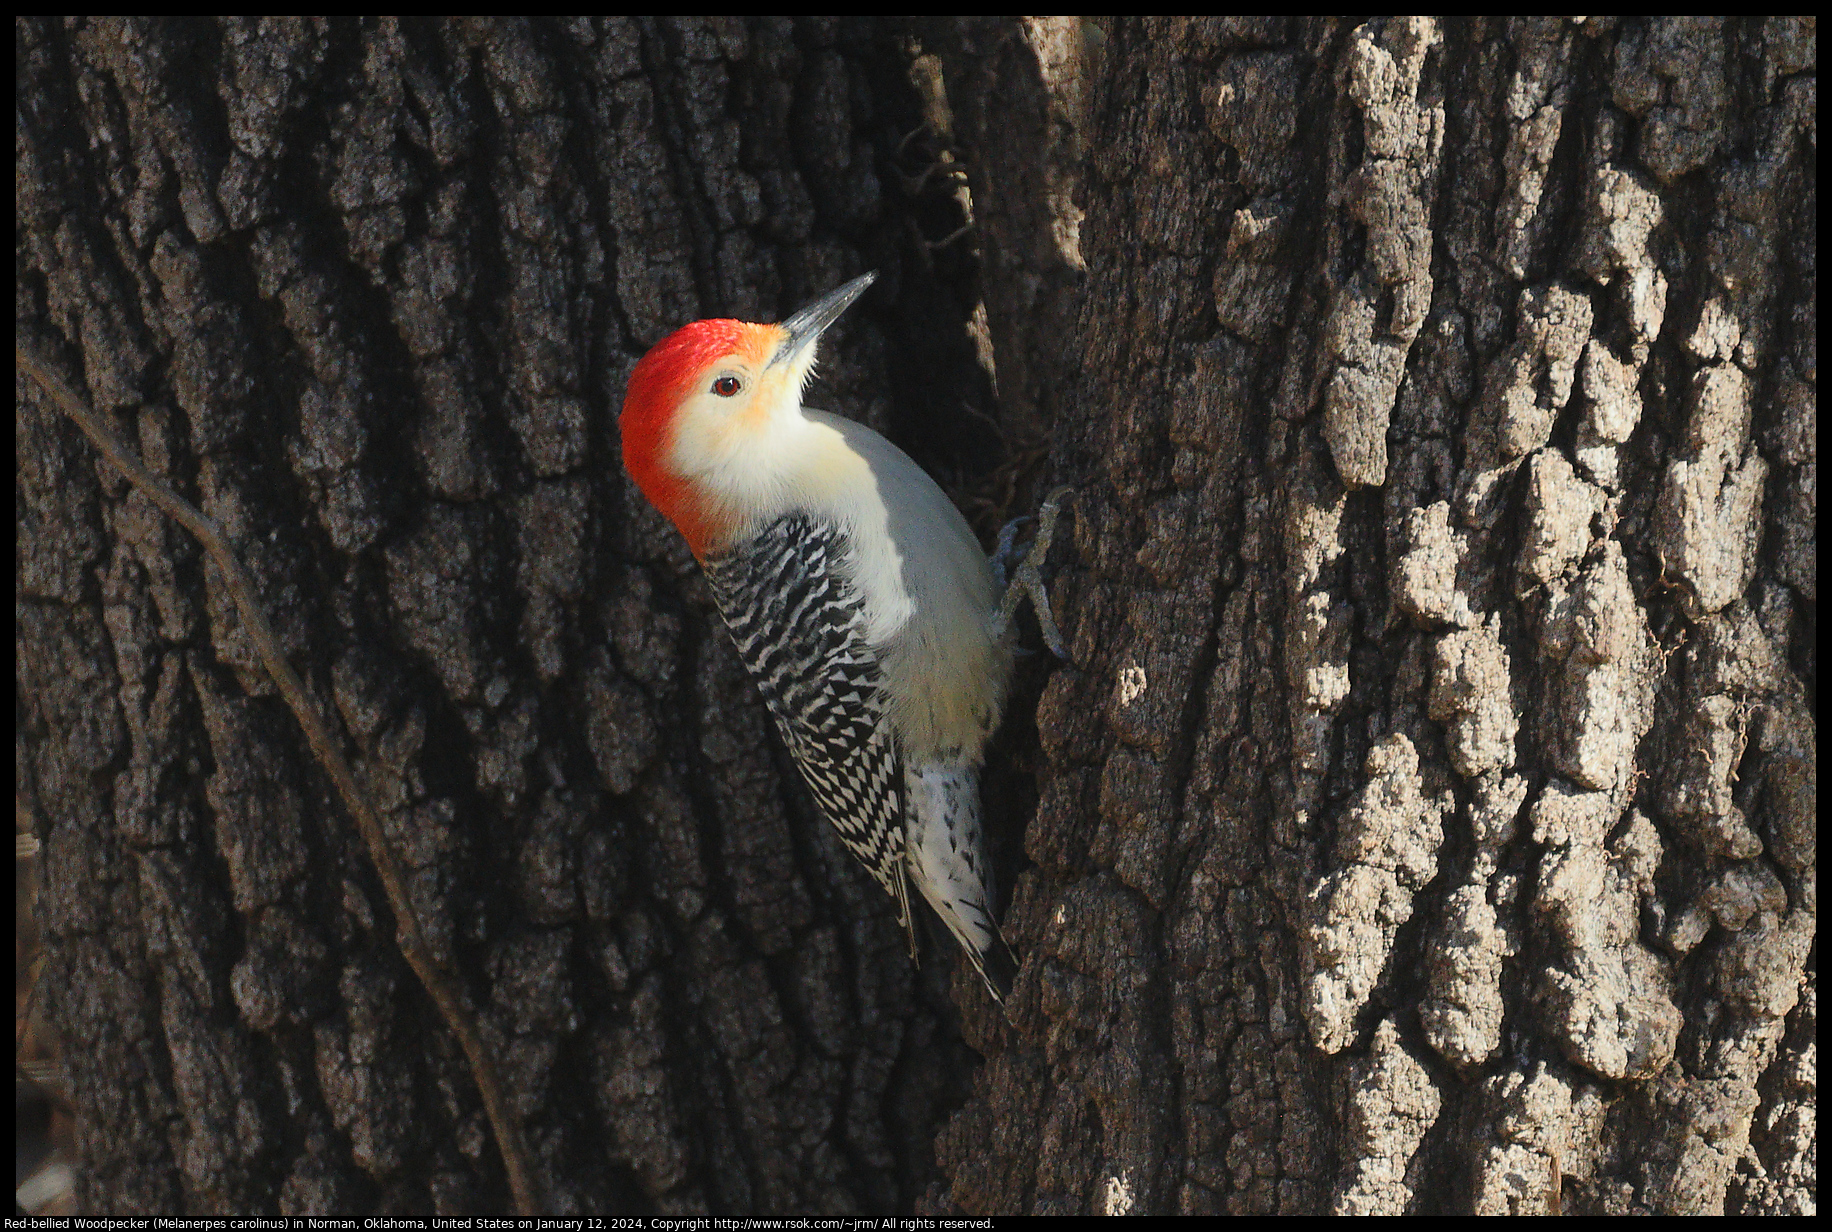 Red-bellied Woodpecker (Melanerpes carolinus) in Norman, Oklahoma, United States on January 12, 2024